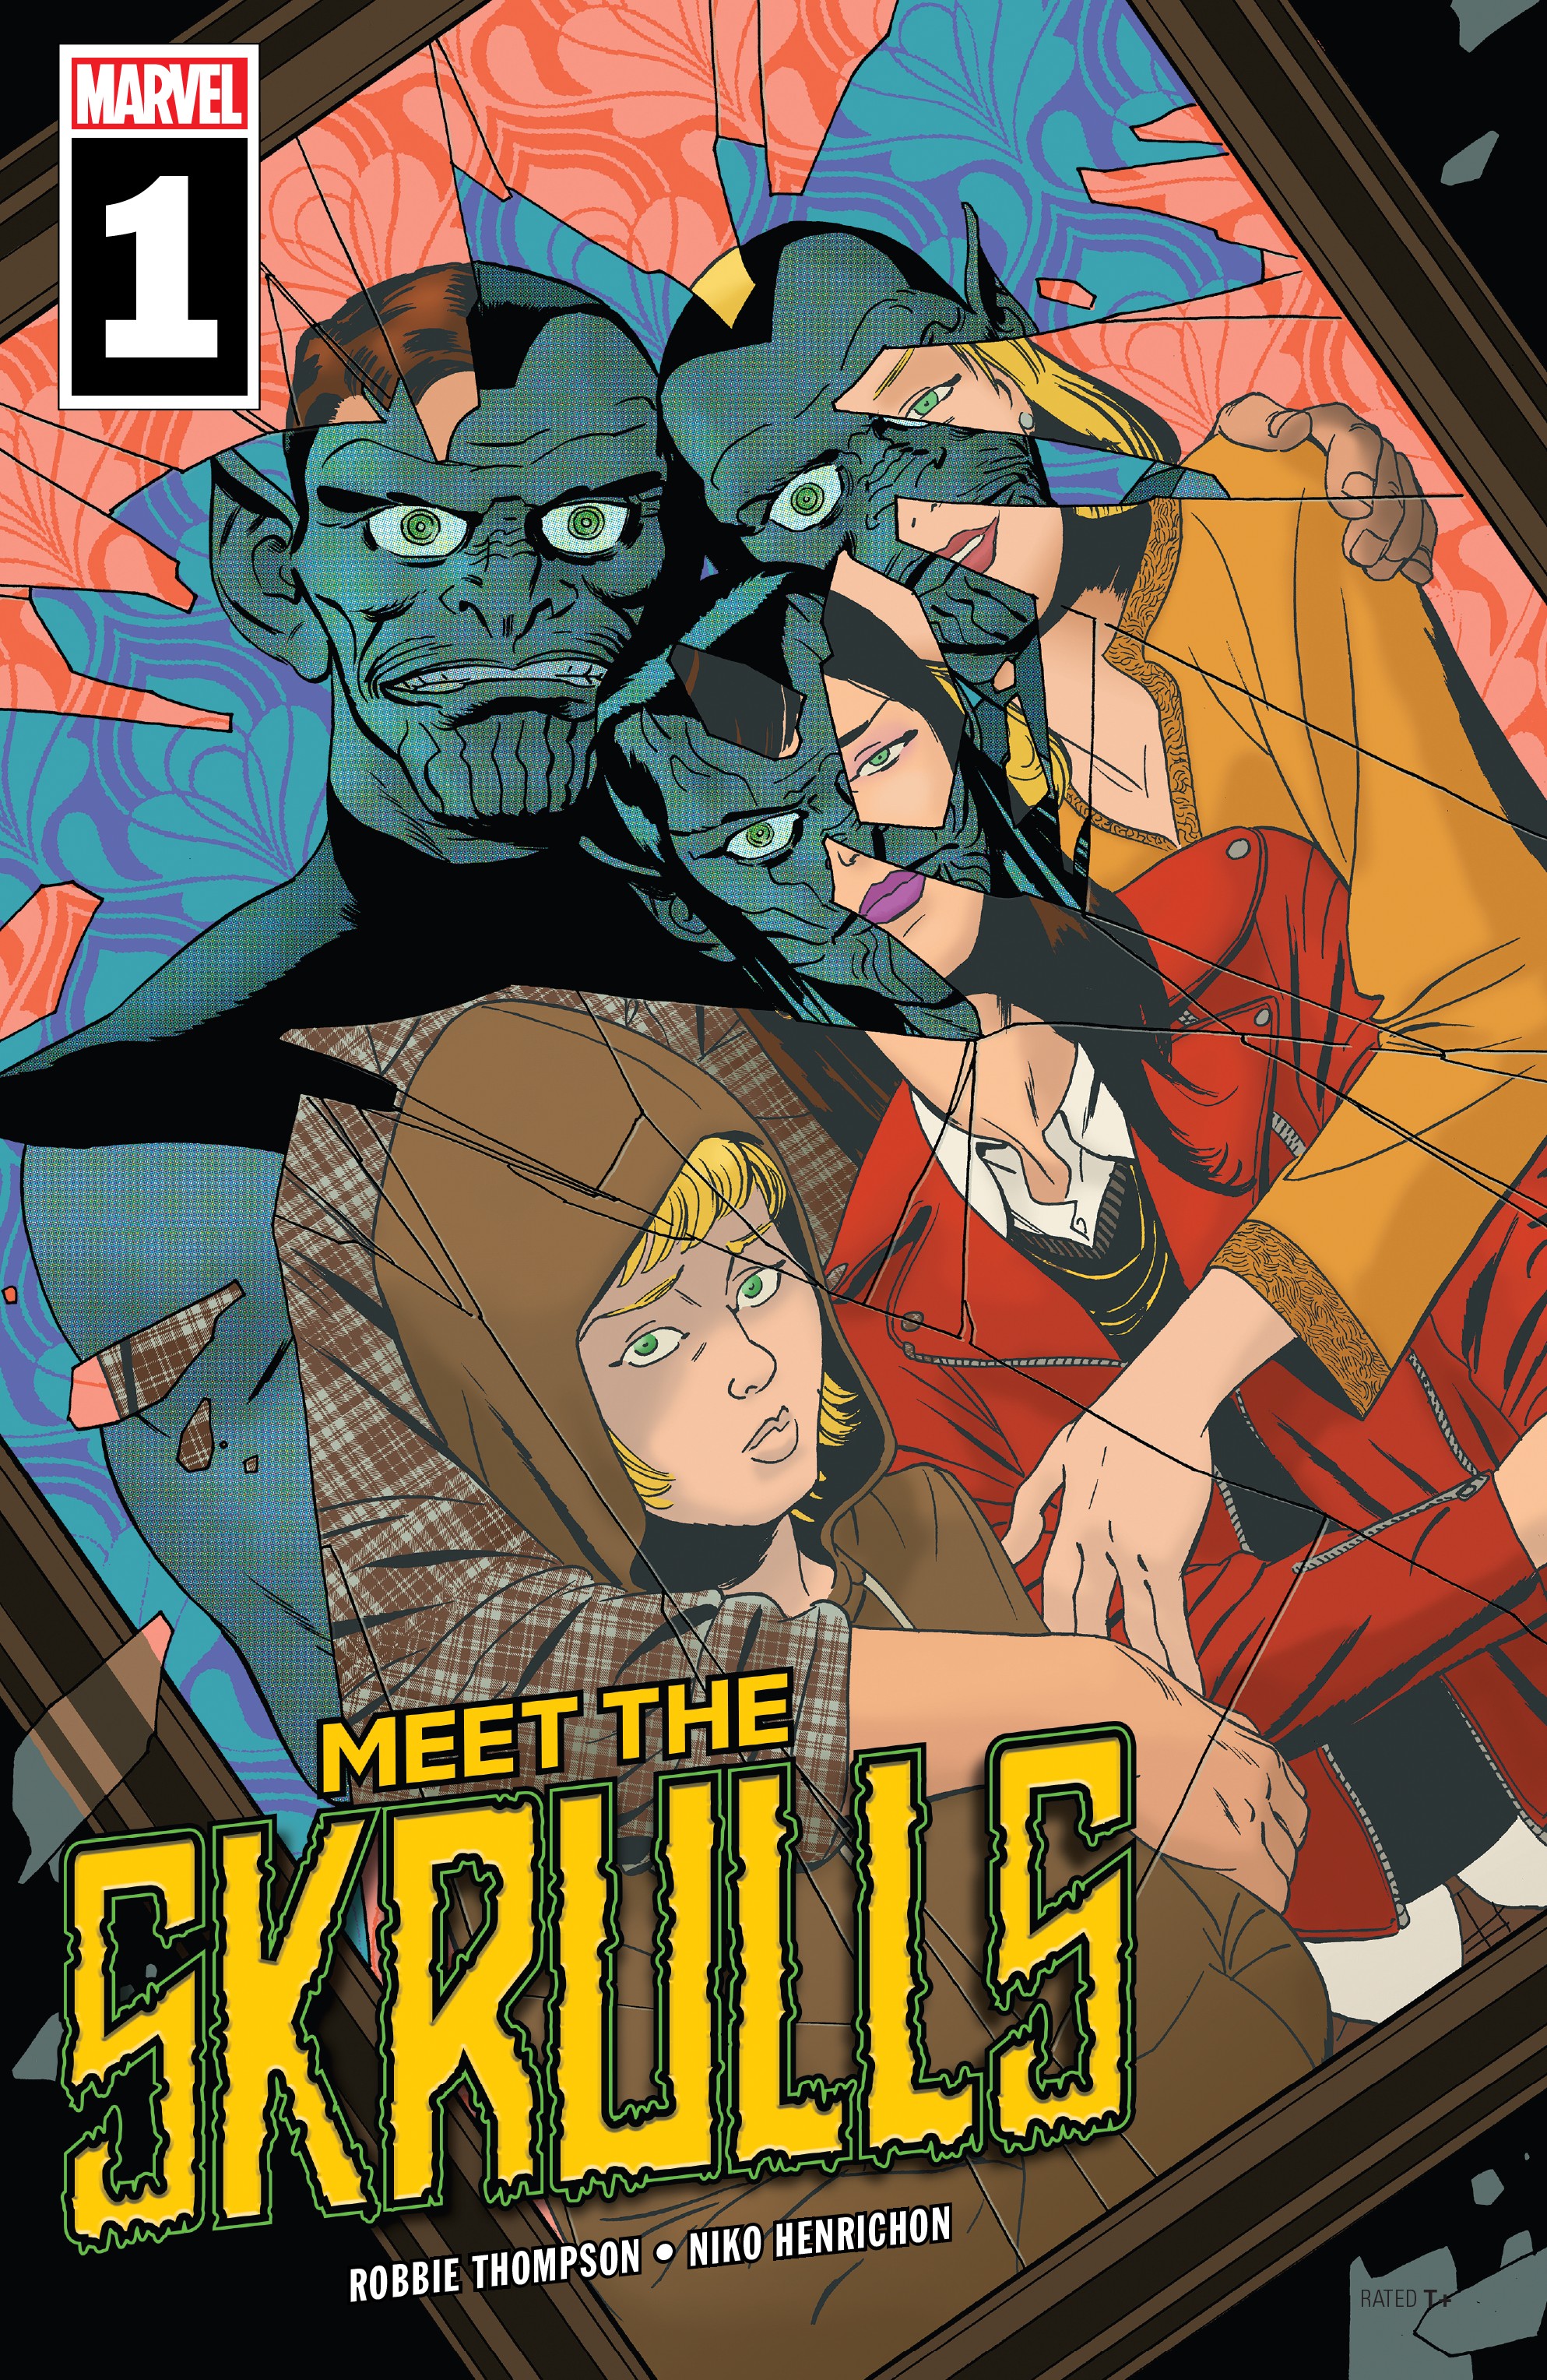 Meet The Skrulls (2019): Chapter 1 - Page 1